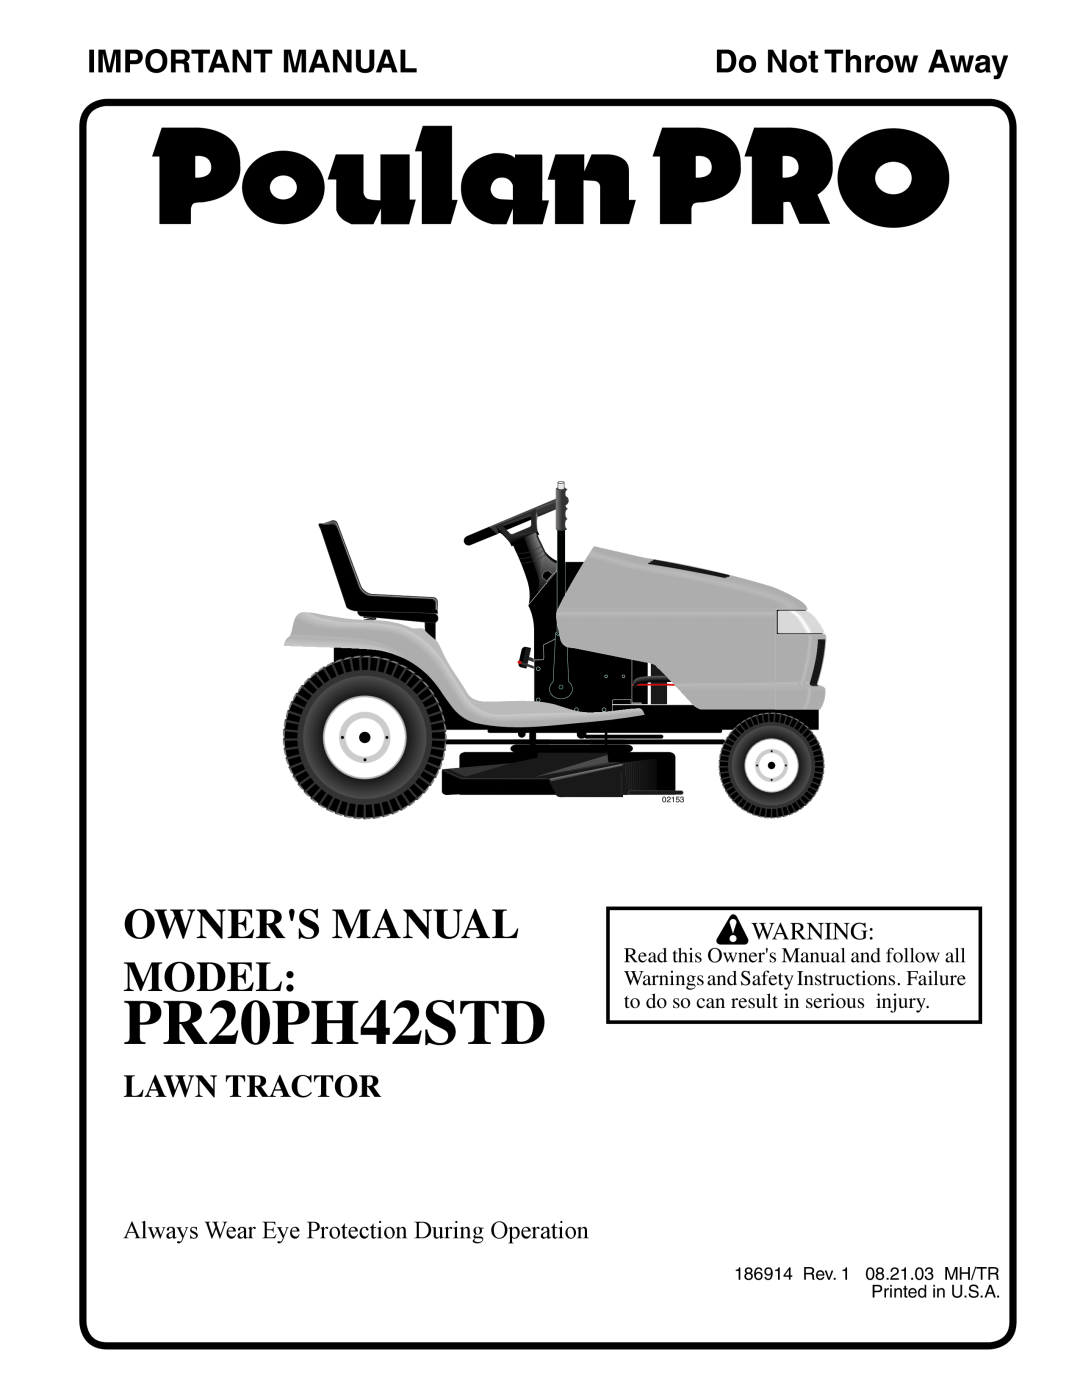 Poulan 186914 owner manual Owners Manual Model, Important Manual, Do Not Throw Away, PR20PH42STD, Lawn Tractor, 02153 